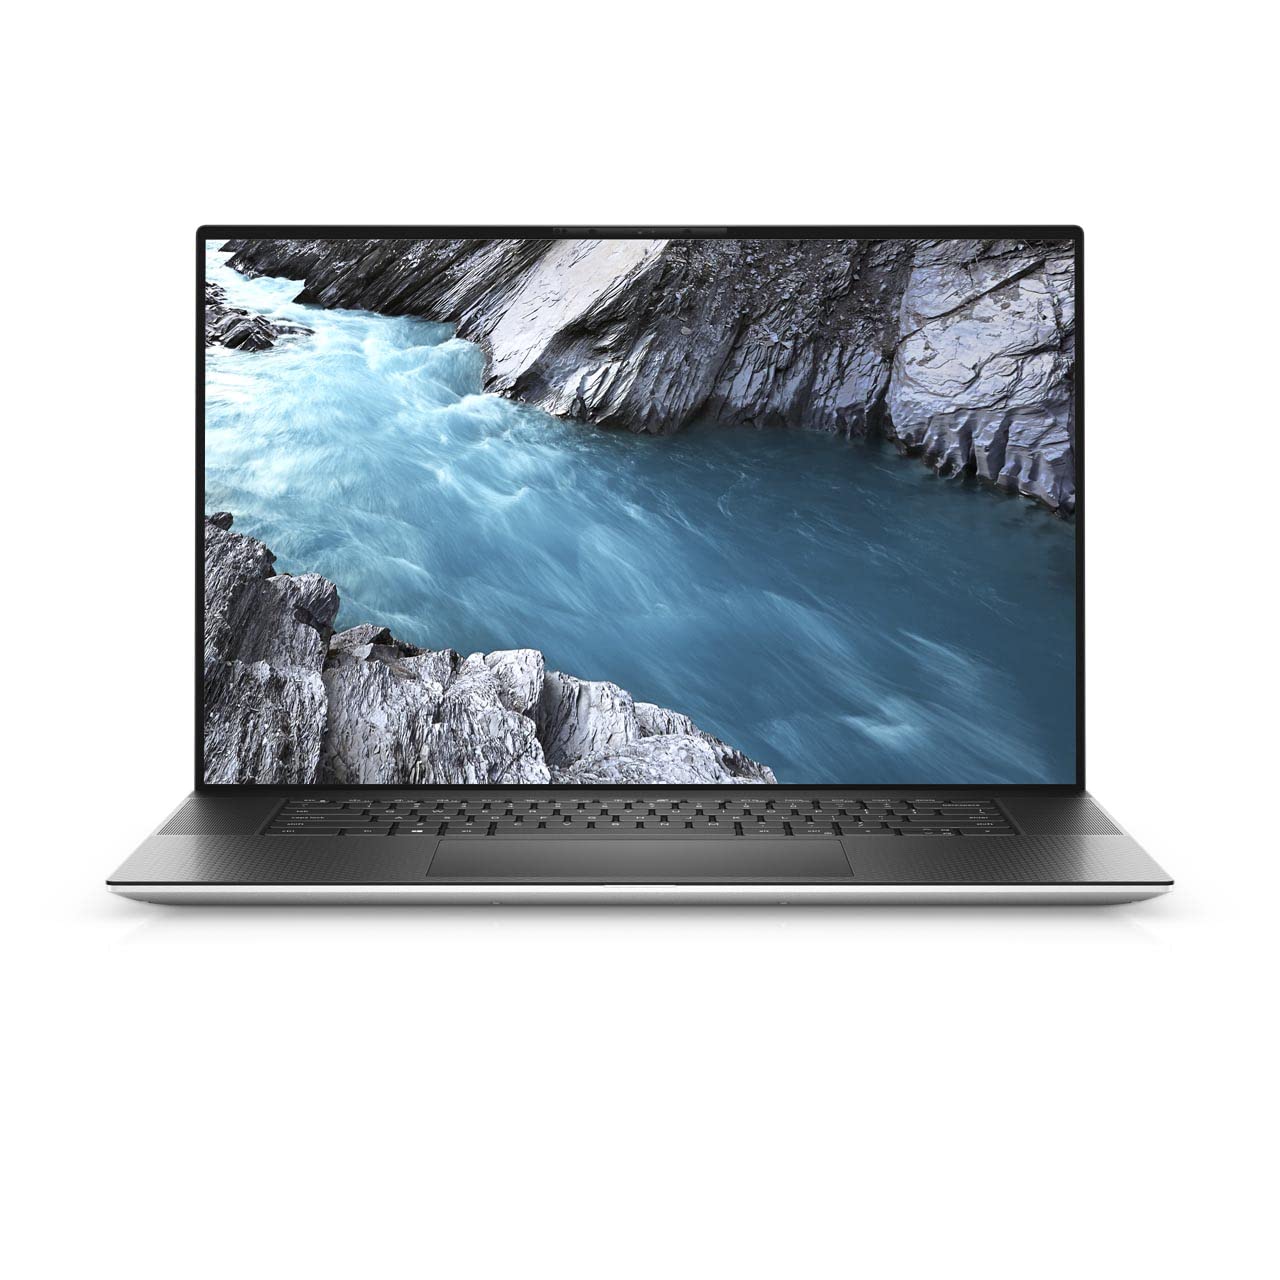 Dell Xps 17 9720 Latest 2022 Ultrabook, 12Th Gen Intel Core I9 12900Hk, Inch Uhd+ Touch Screen, 2Tb Ssd, 64 Gb Ram, Nvidia Geforce Rtx 3060 6Gb Graphics, Win11Home, Mcafee3Yr,Slv, Silver